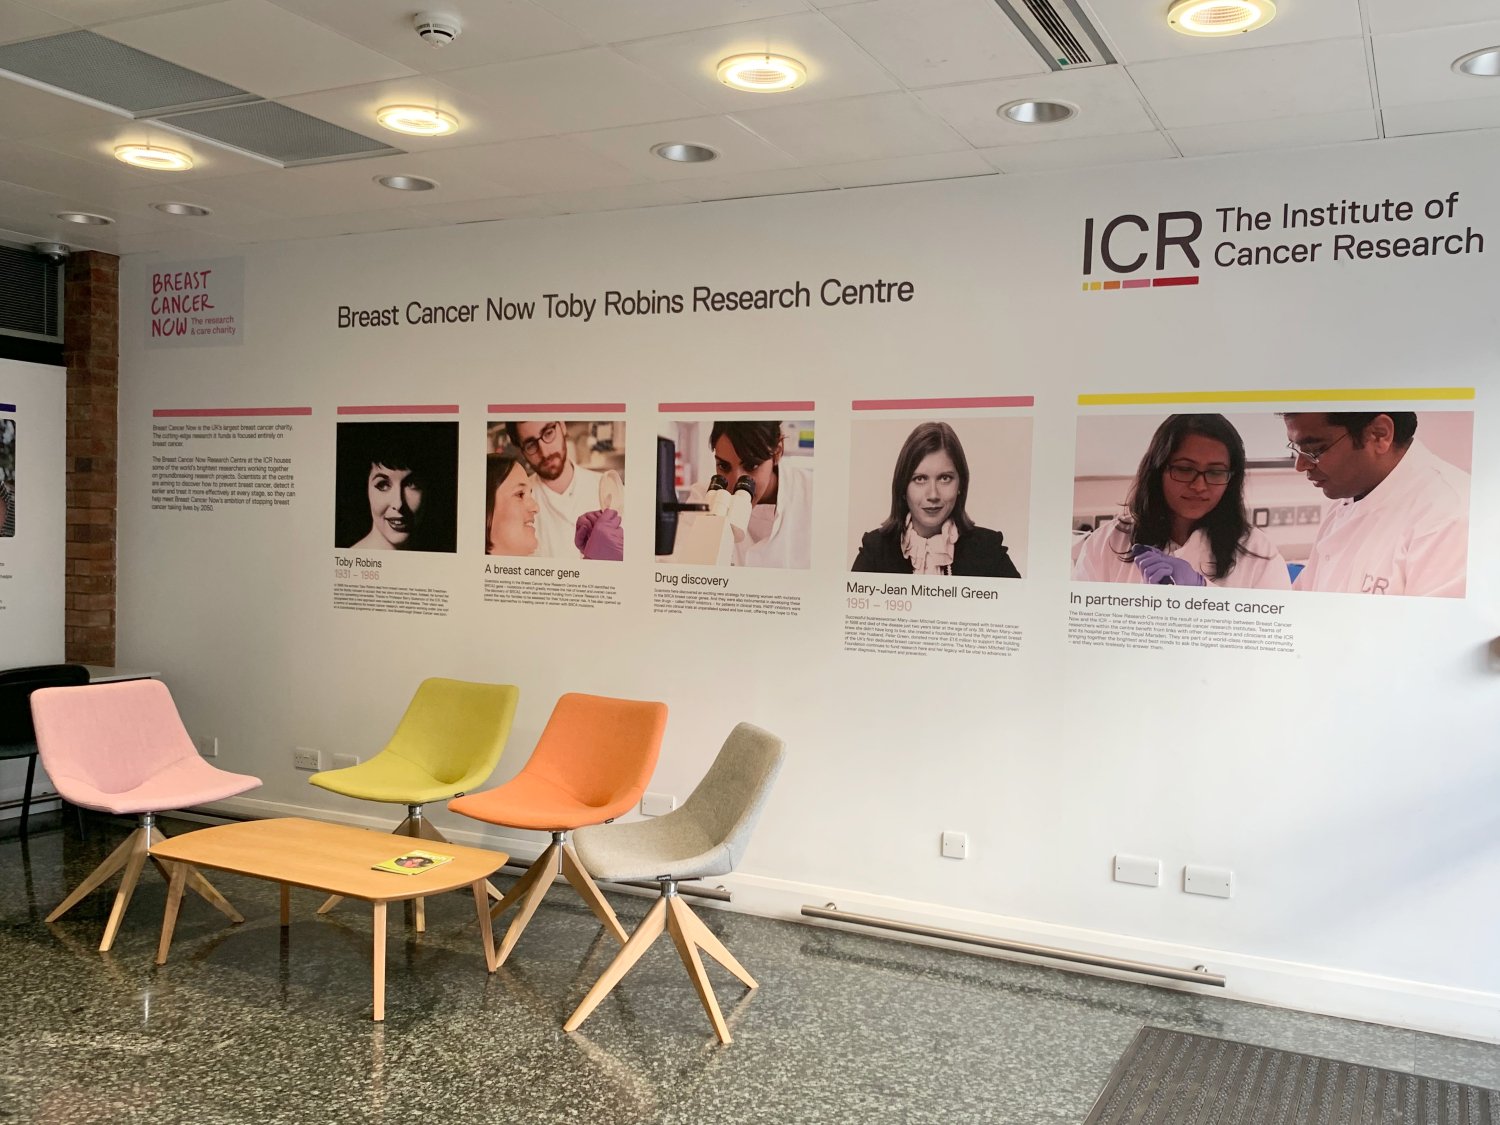 Breast Cancer Now wing seating area with colourful chairs and a timeline of the Centre on the walls